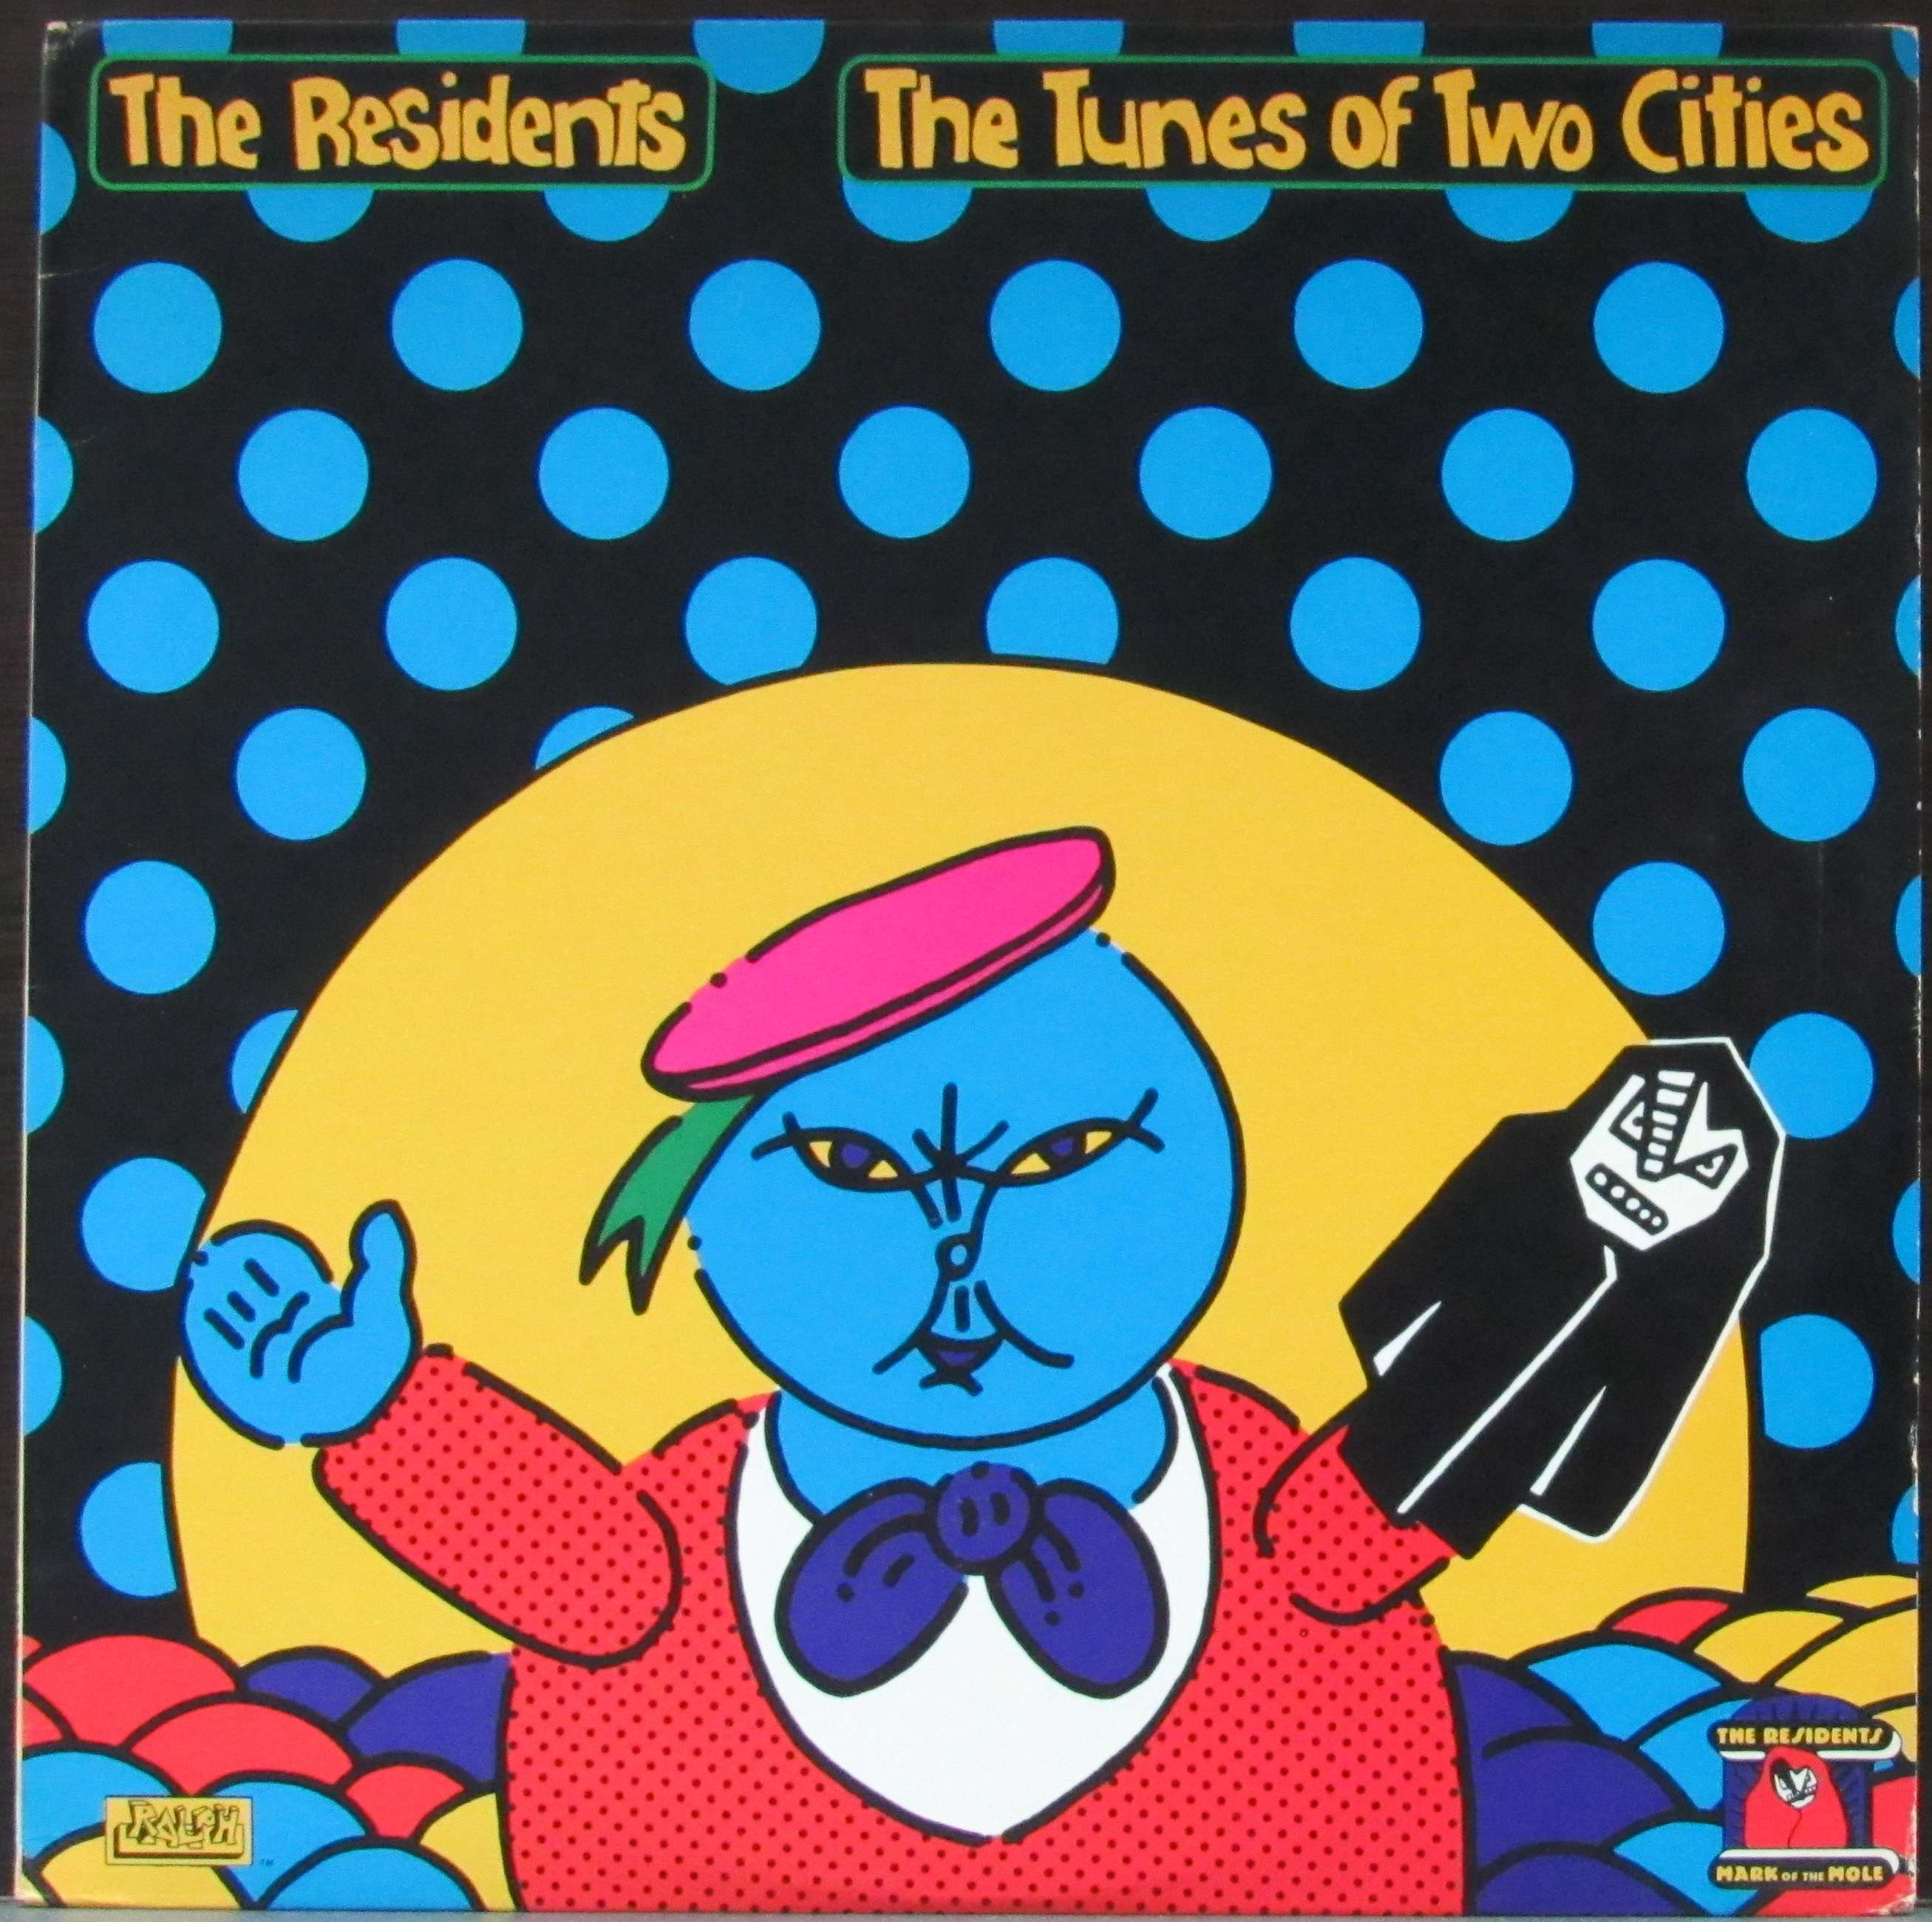 Tunes lp. The Residents – the Tunes of two Cities. The Residents Mark of the Mole. The Residents the big Bubble. Resident.